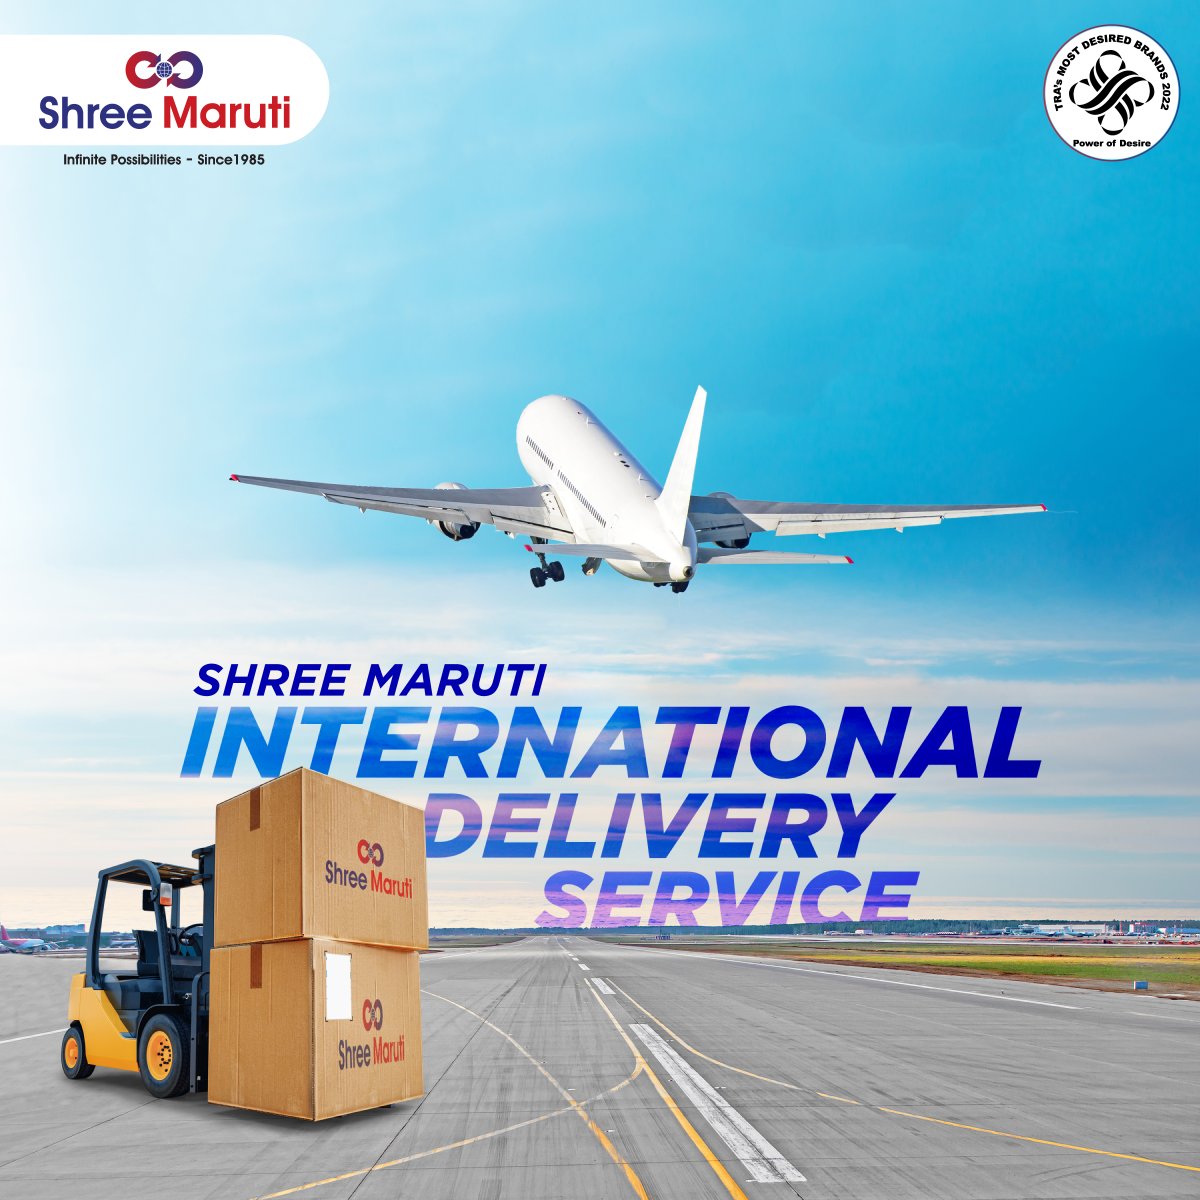 Shree Maruti International Delivery Service. #Shreemaruti #Internationaldelivery #deliveryservice #Convenience #DoorstepDelivery #deliveryservice #fastdelivery #indianexpressdelivery #cargo #logistics #supplychain #parceldeliveryservice #quickdelivery #indianparcel #transport